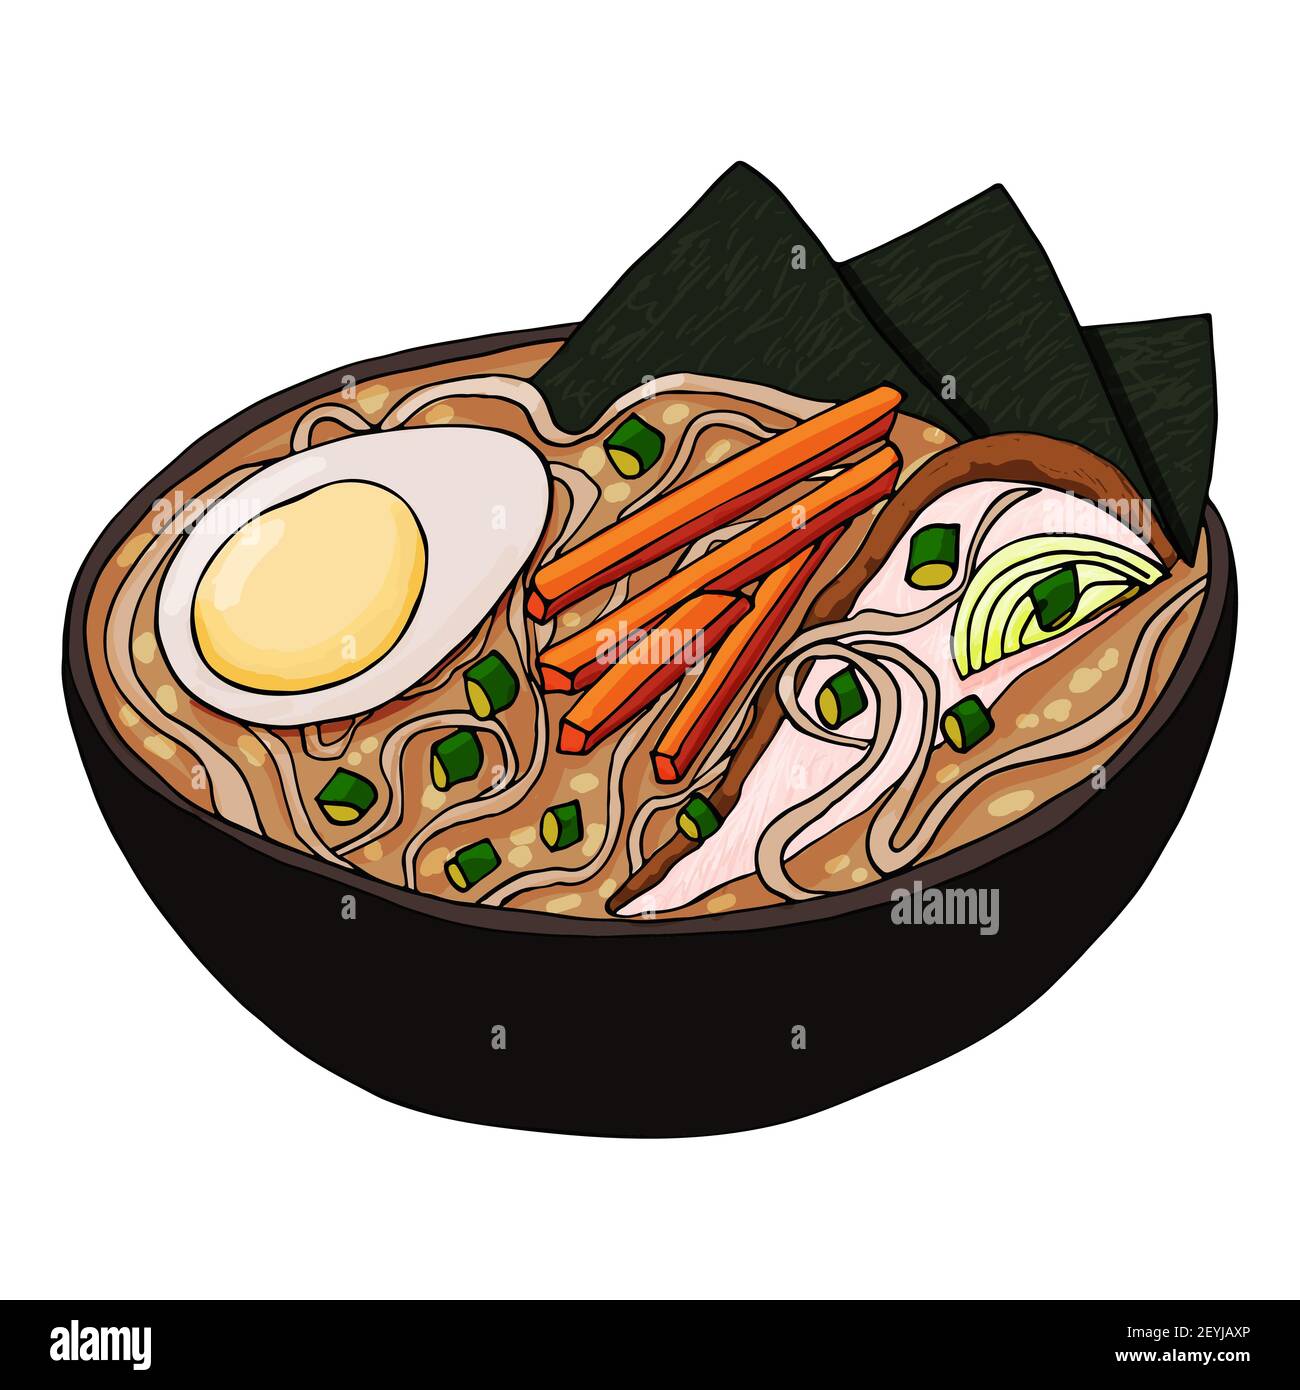 Japanese ramen soup vector. Tradition Asian meal with chicken, eggs, carrots, onions and noodles in a miso broth. Stock illustration isolated on white Stock Vector